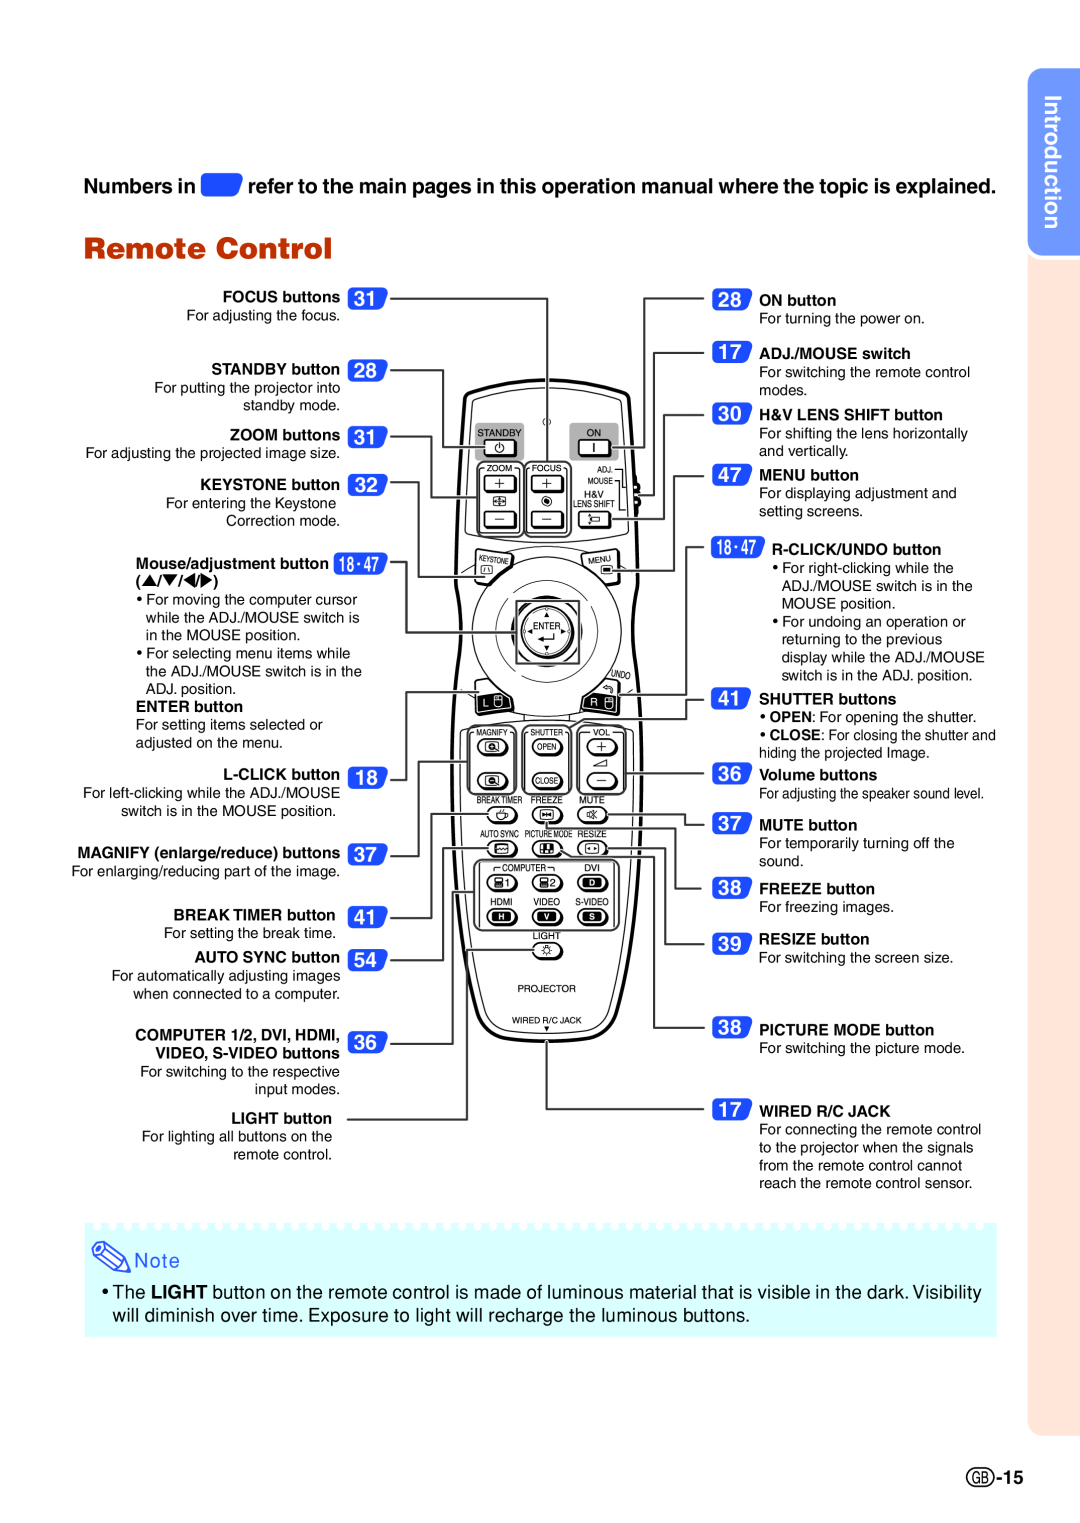 Sharp XG-P610X-N Remote Control, Introduction, FOCUS buttons, STANDBY button, ZOOM buttons, KEYSTONE button, ON button 